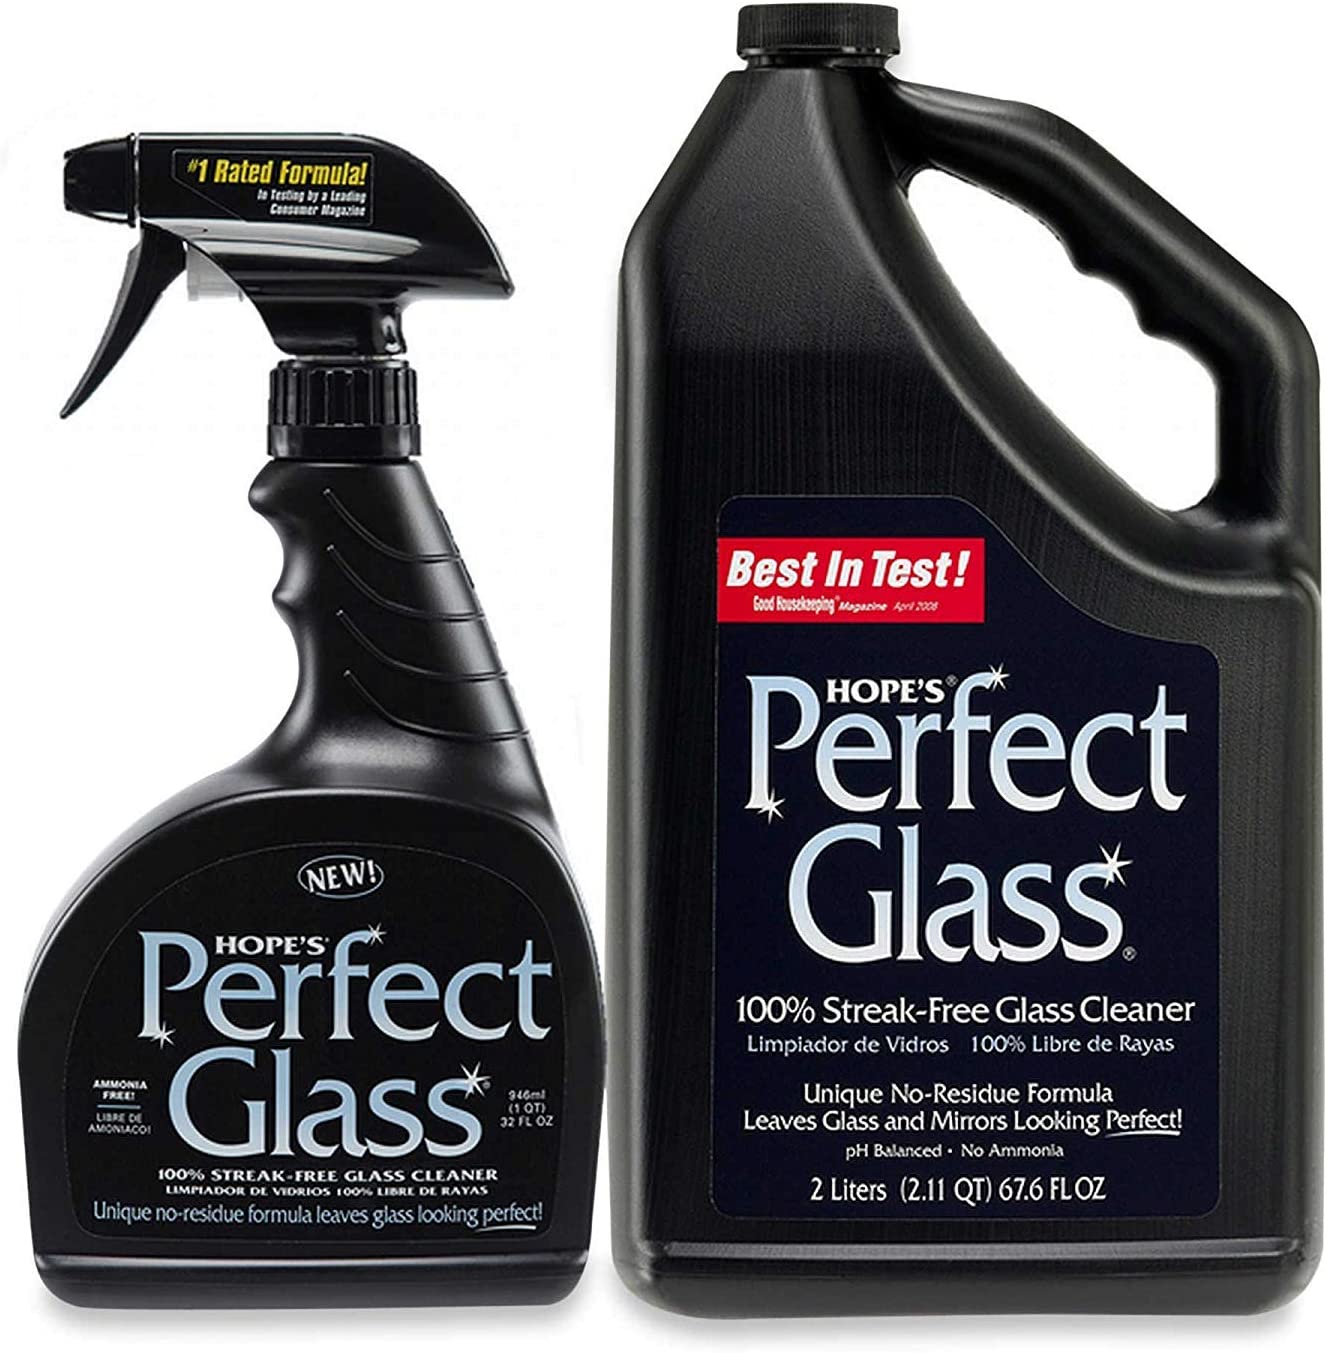 Hopes Perfect Glass Refill with 32oz Spray Cleaner